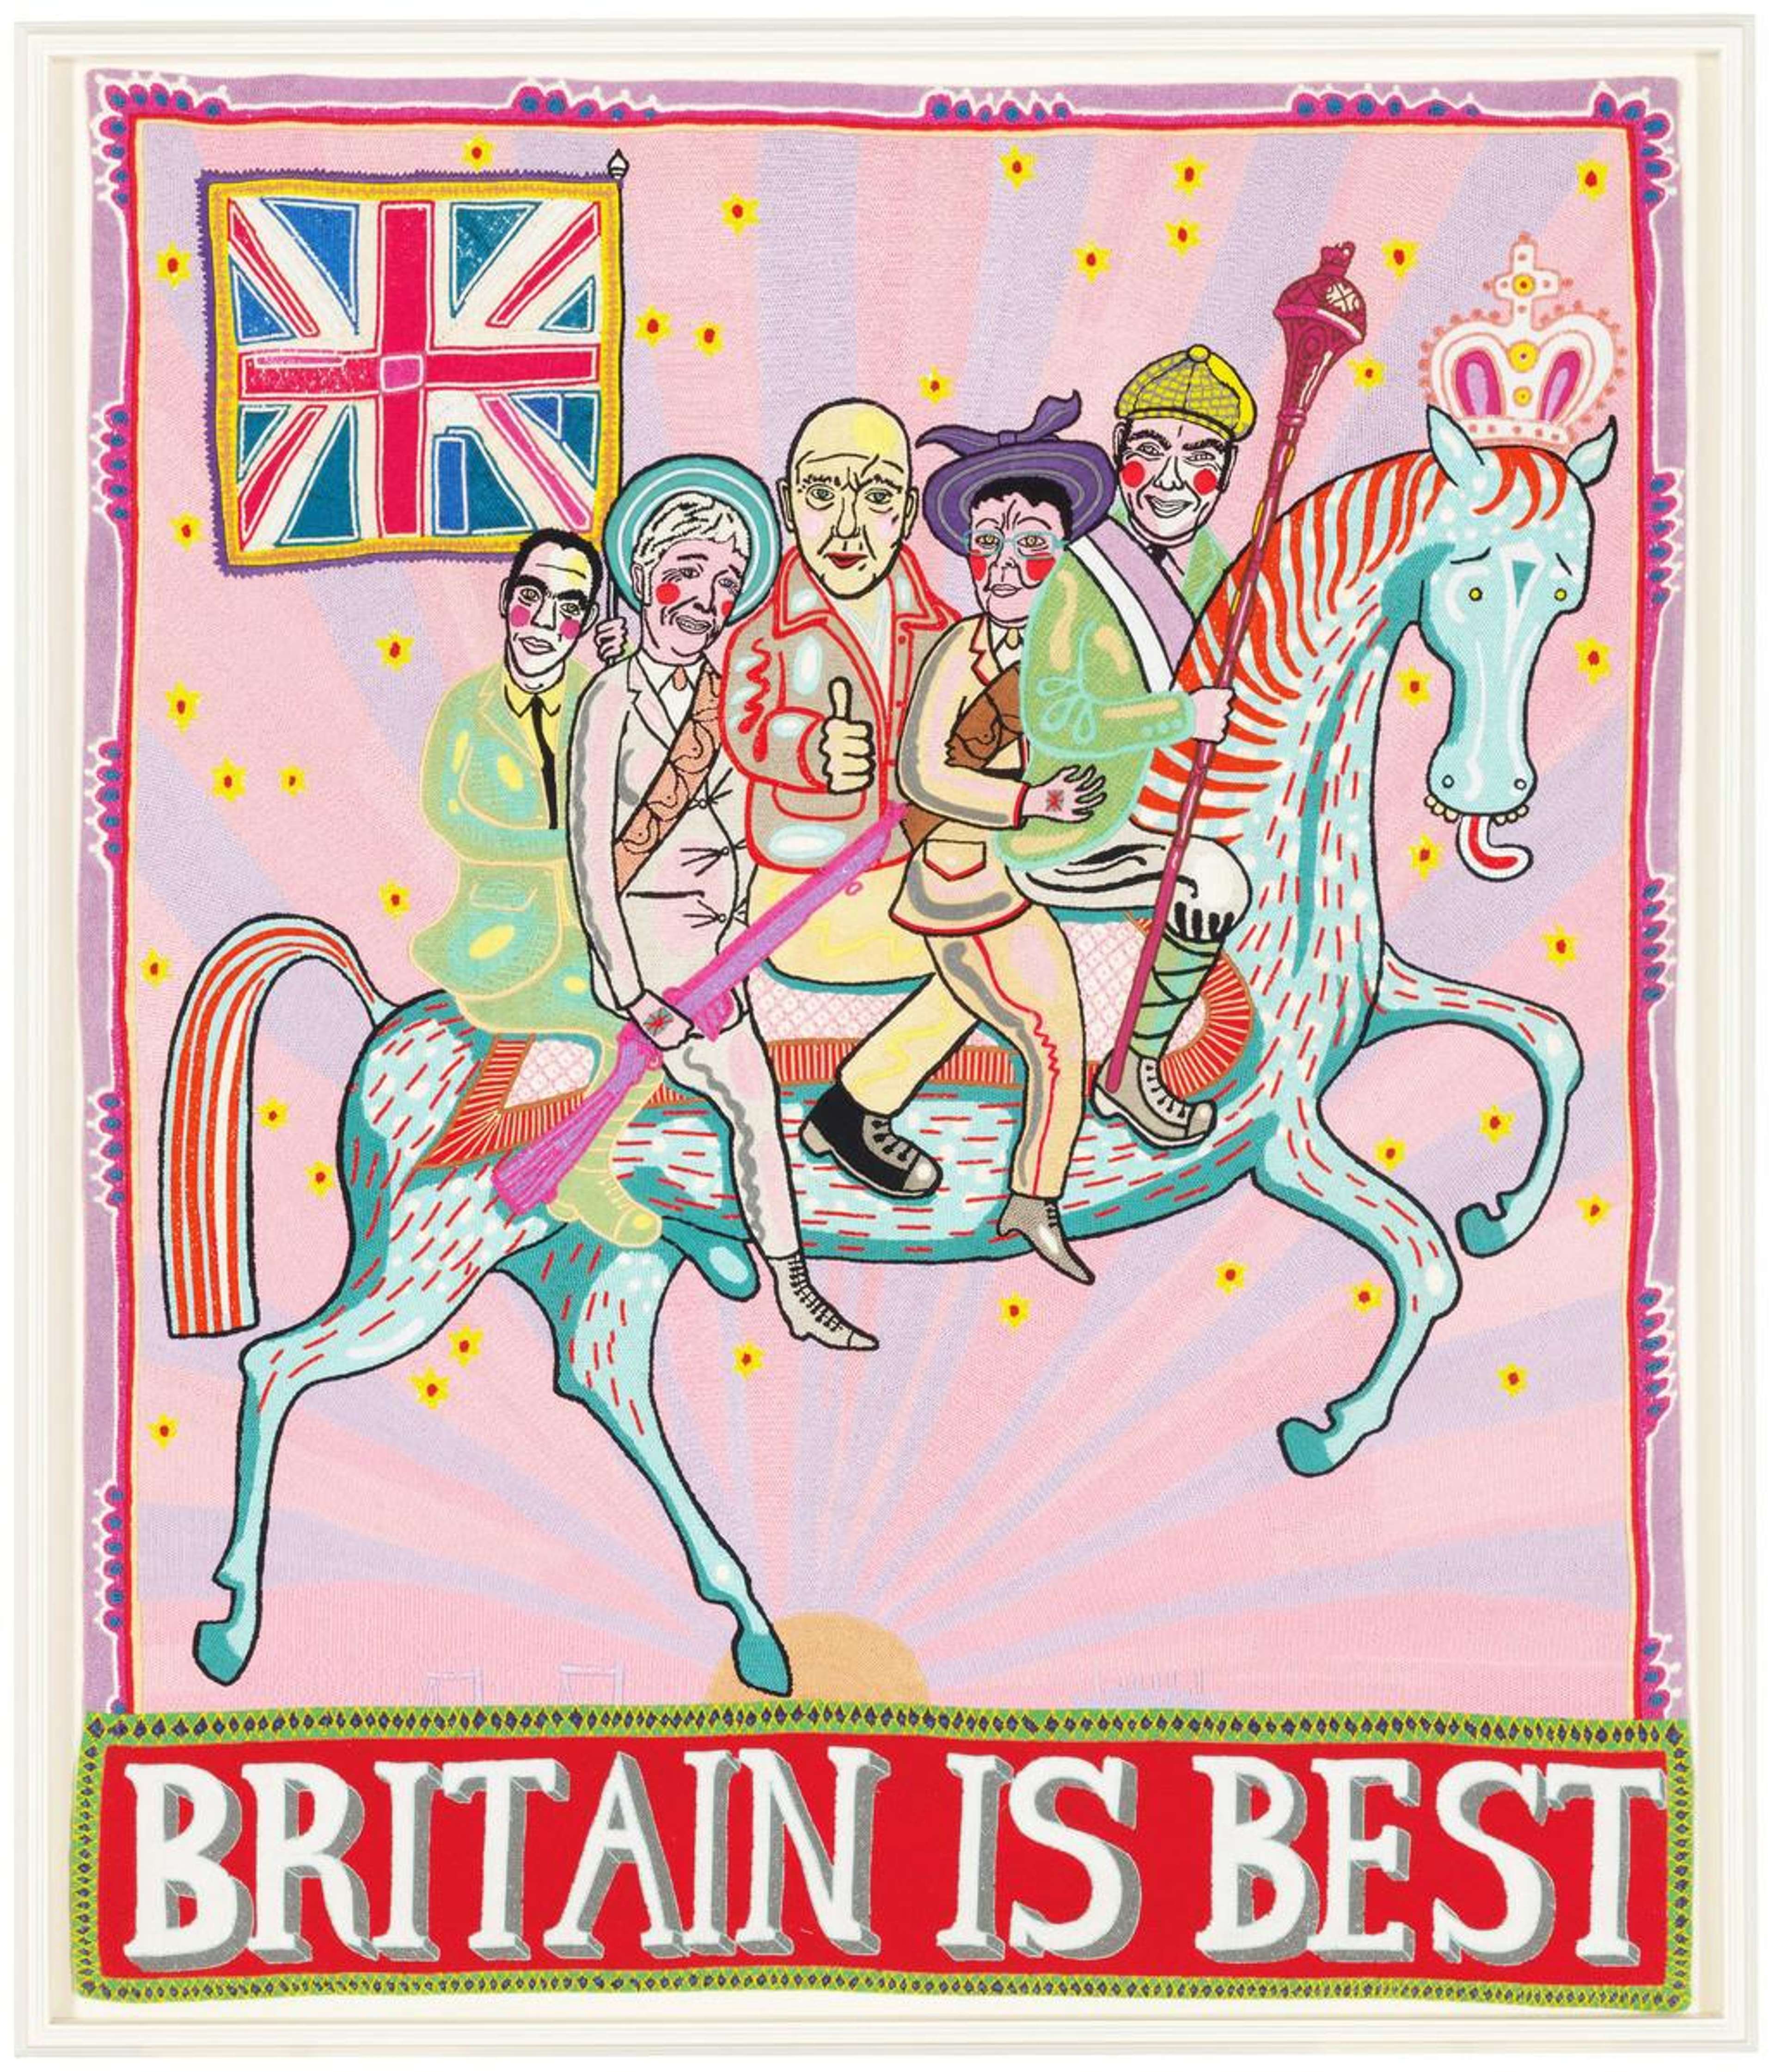 Embroidery by Grayson Perry, depicting five Unionists riding a horse. The Unionists are carrying a slightly moth-eaten Union Jack. They are set against a backdrop of a pink and purple sunset, with the silhouettes of two big cranes and the Titanic riding into the horizon.